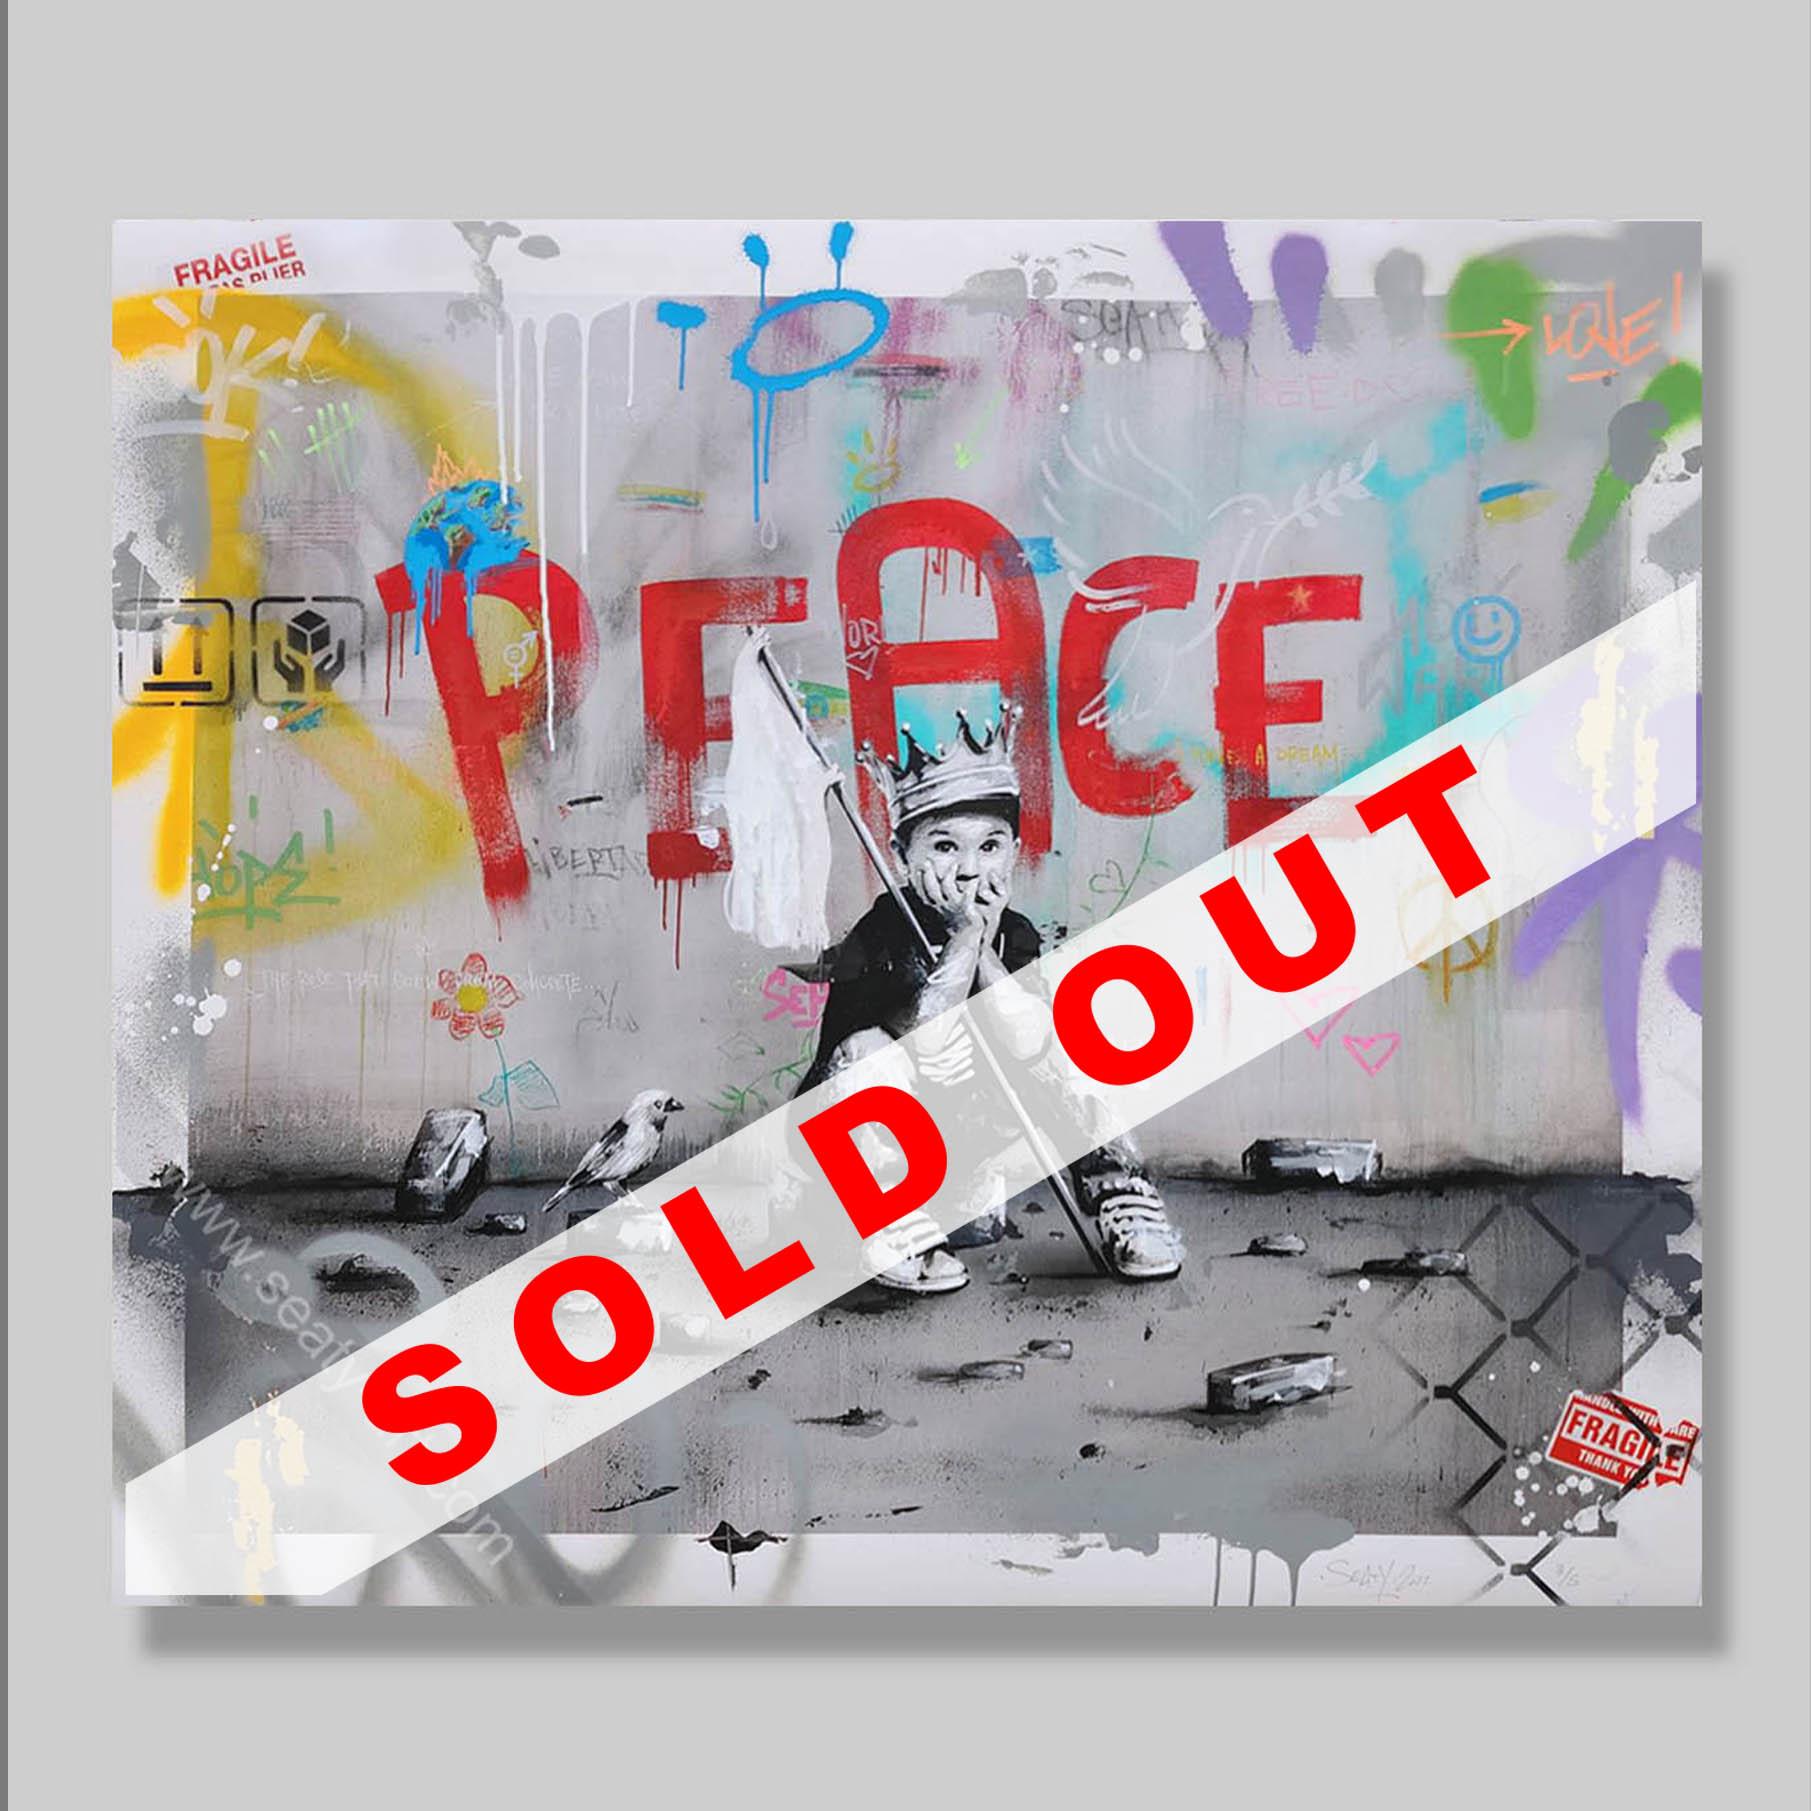 Sold out site 5